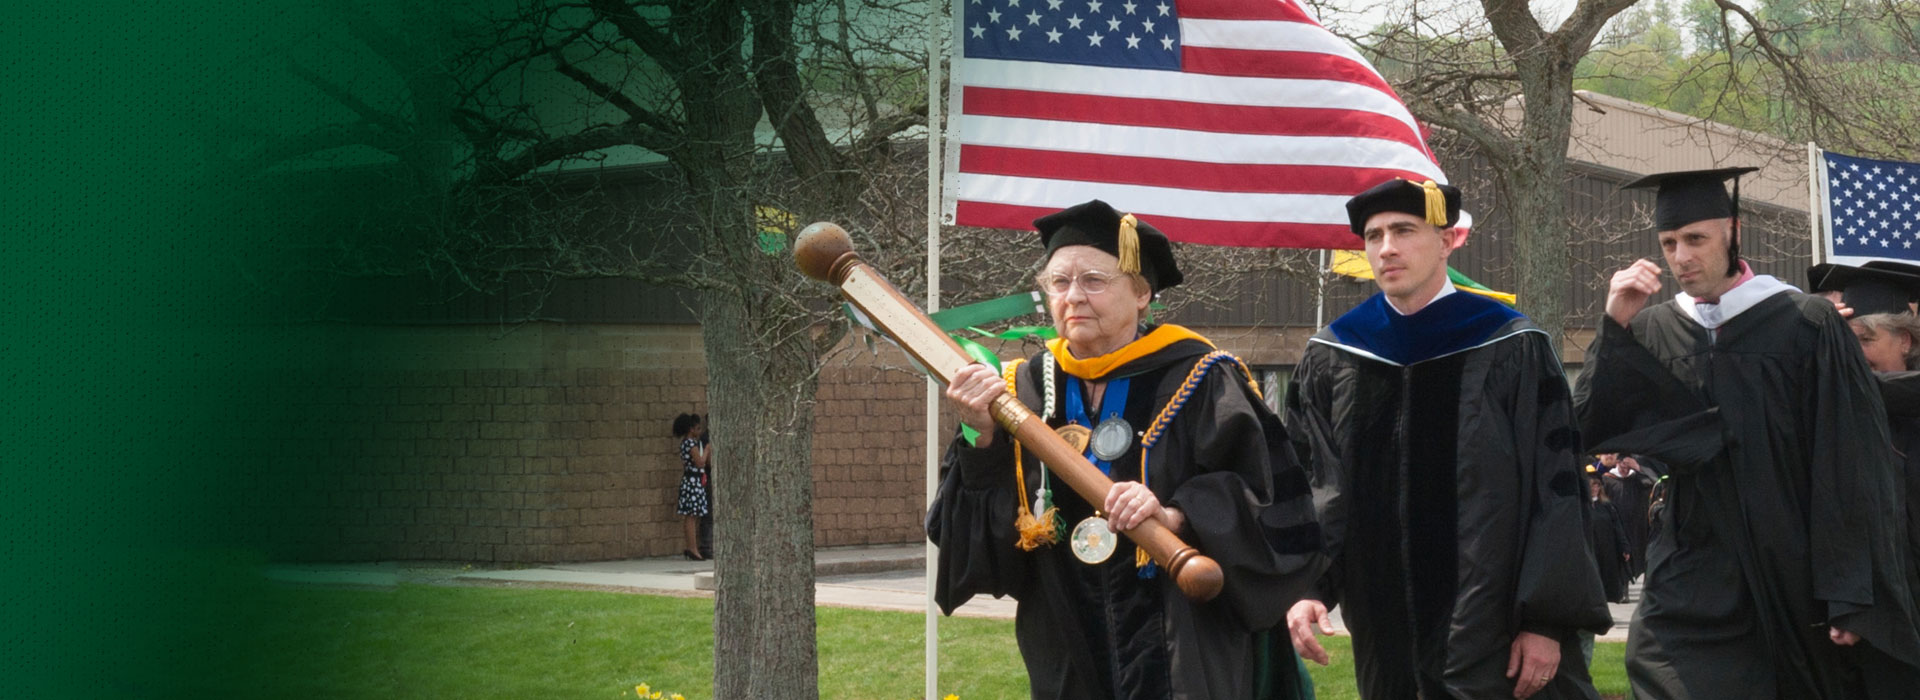 Shirley Crawford leads the college’s commencement procession.